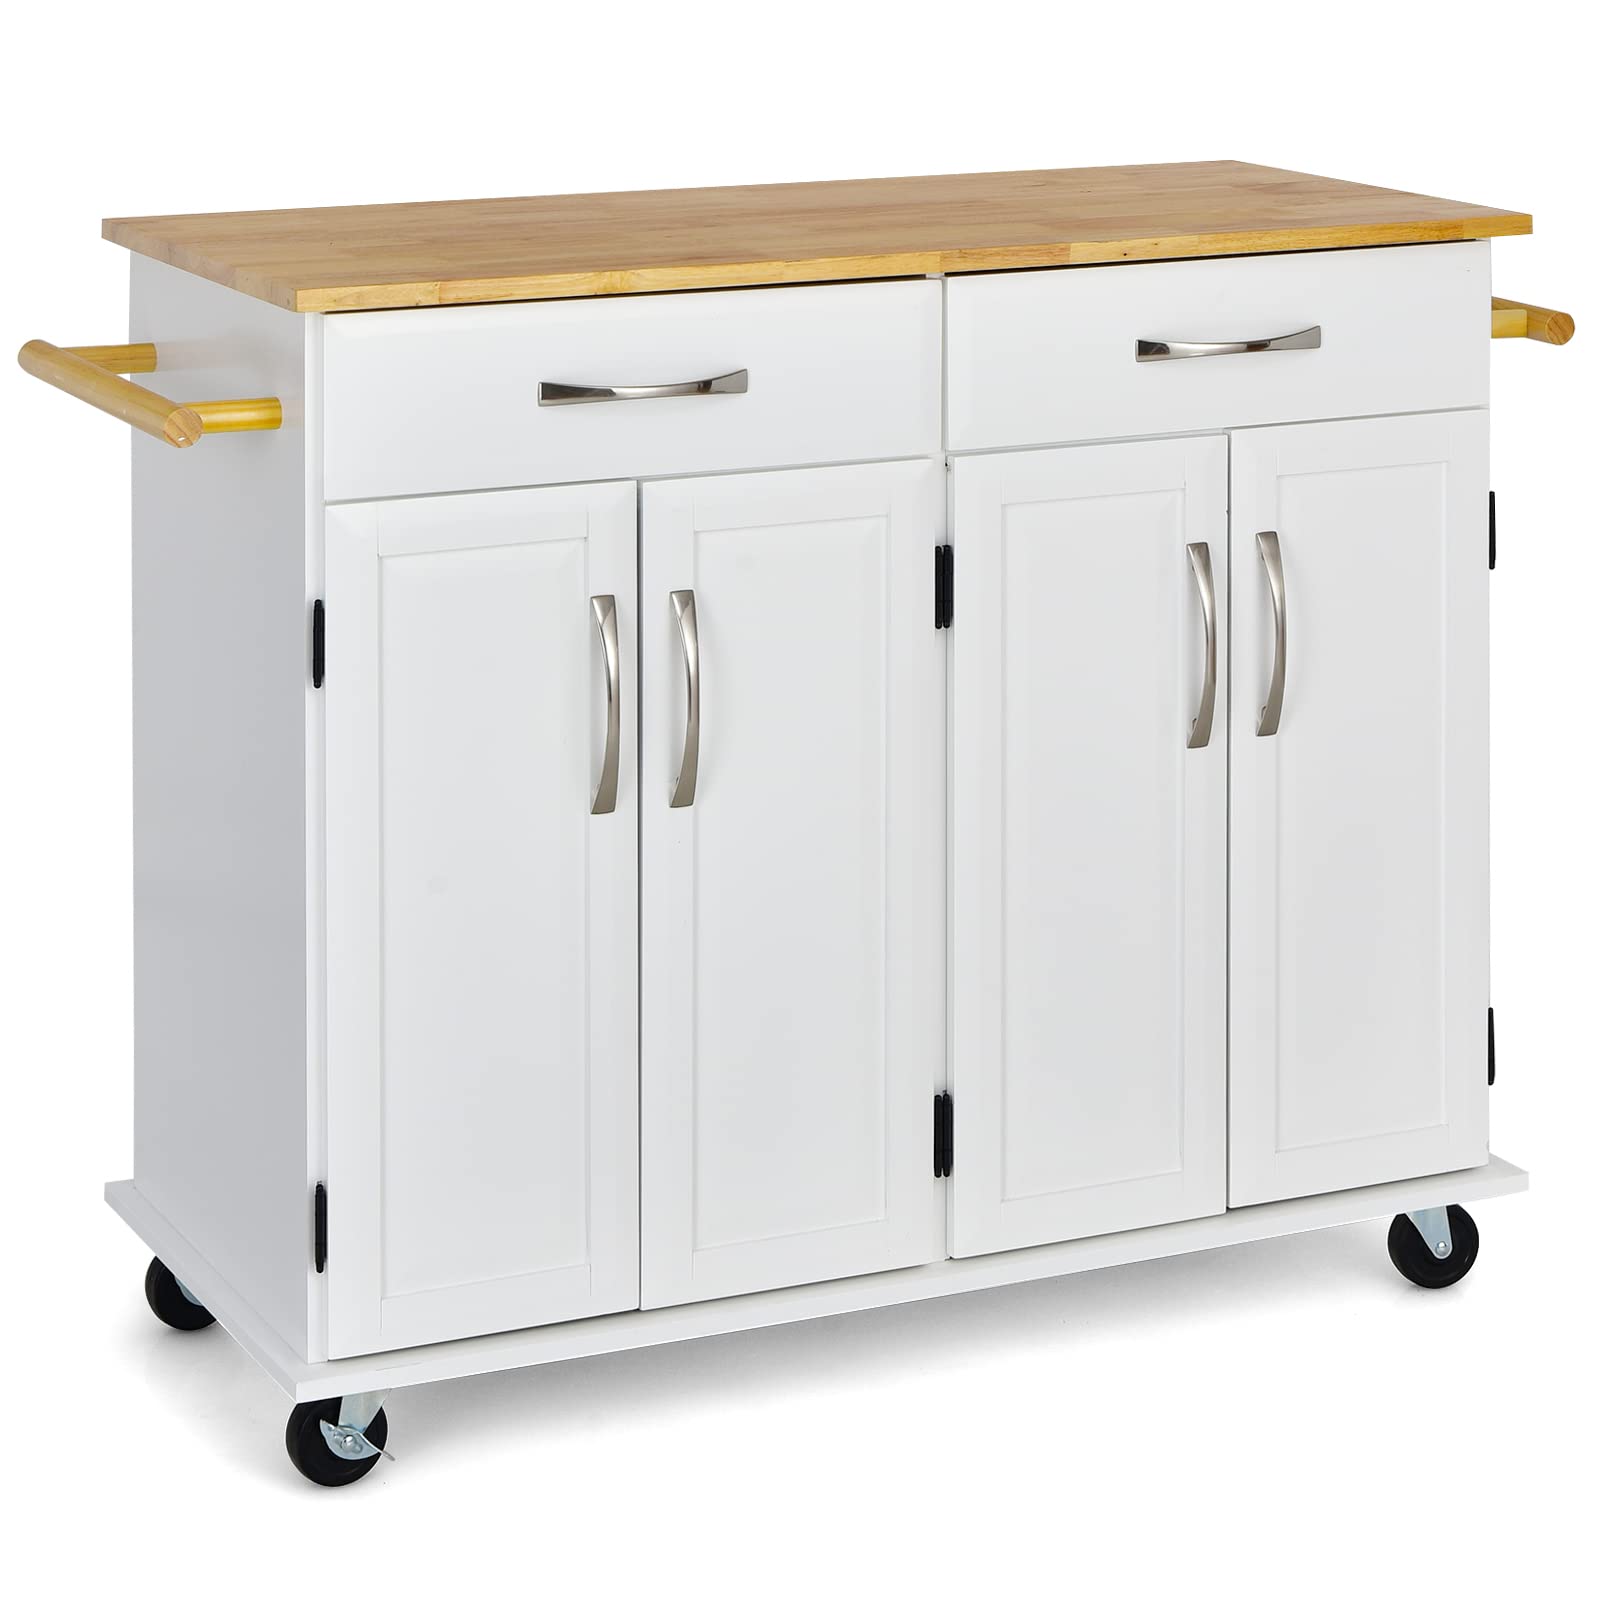 Giantex Mobile Kitchen Islands, Large Kitchen Cart with 2 Drawers